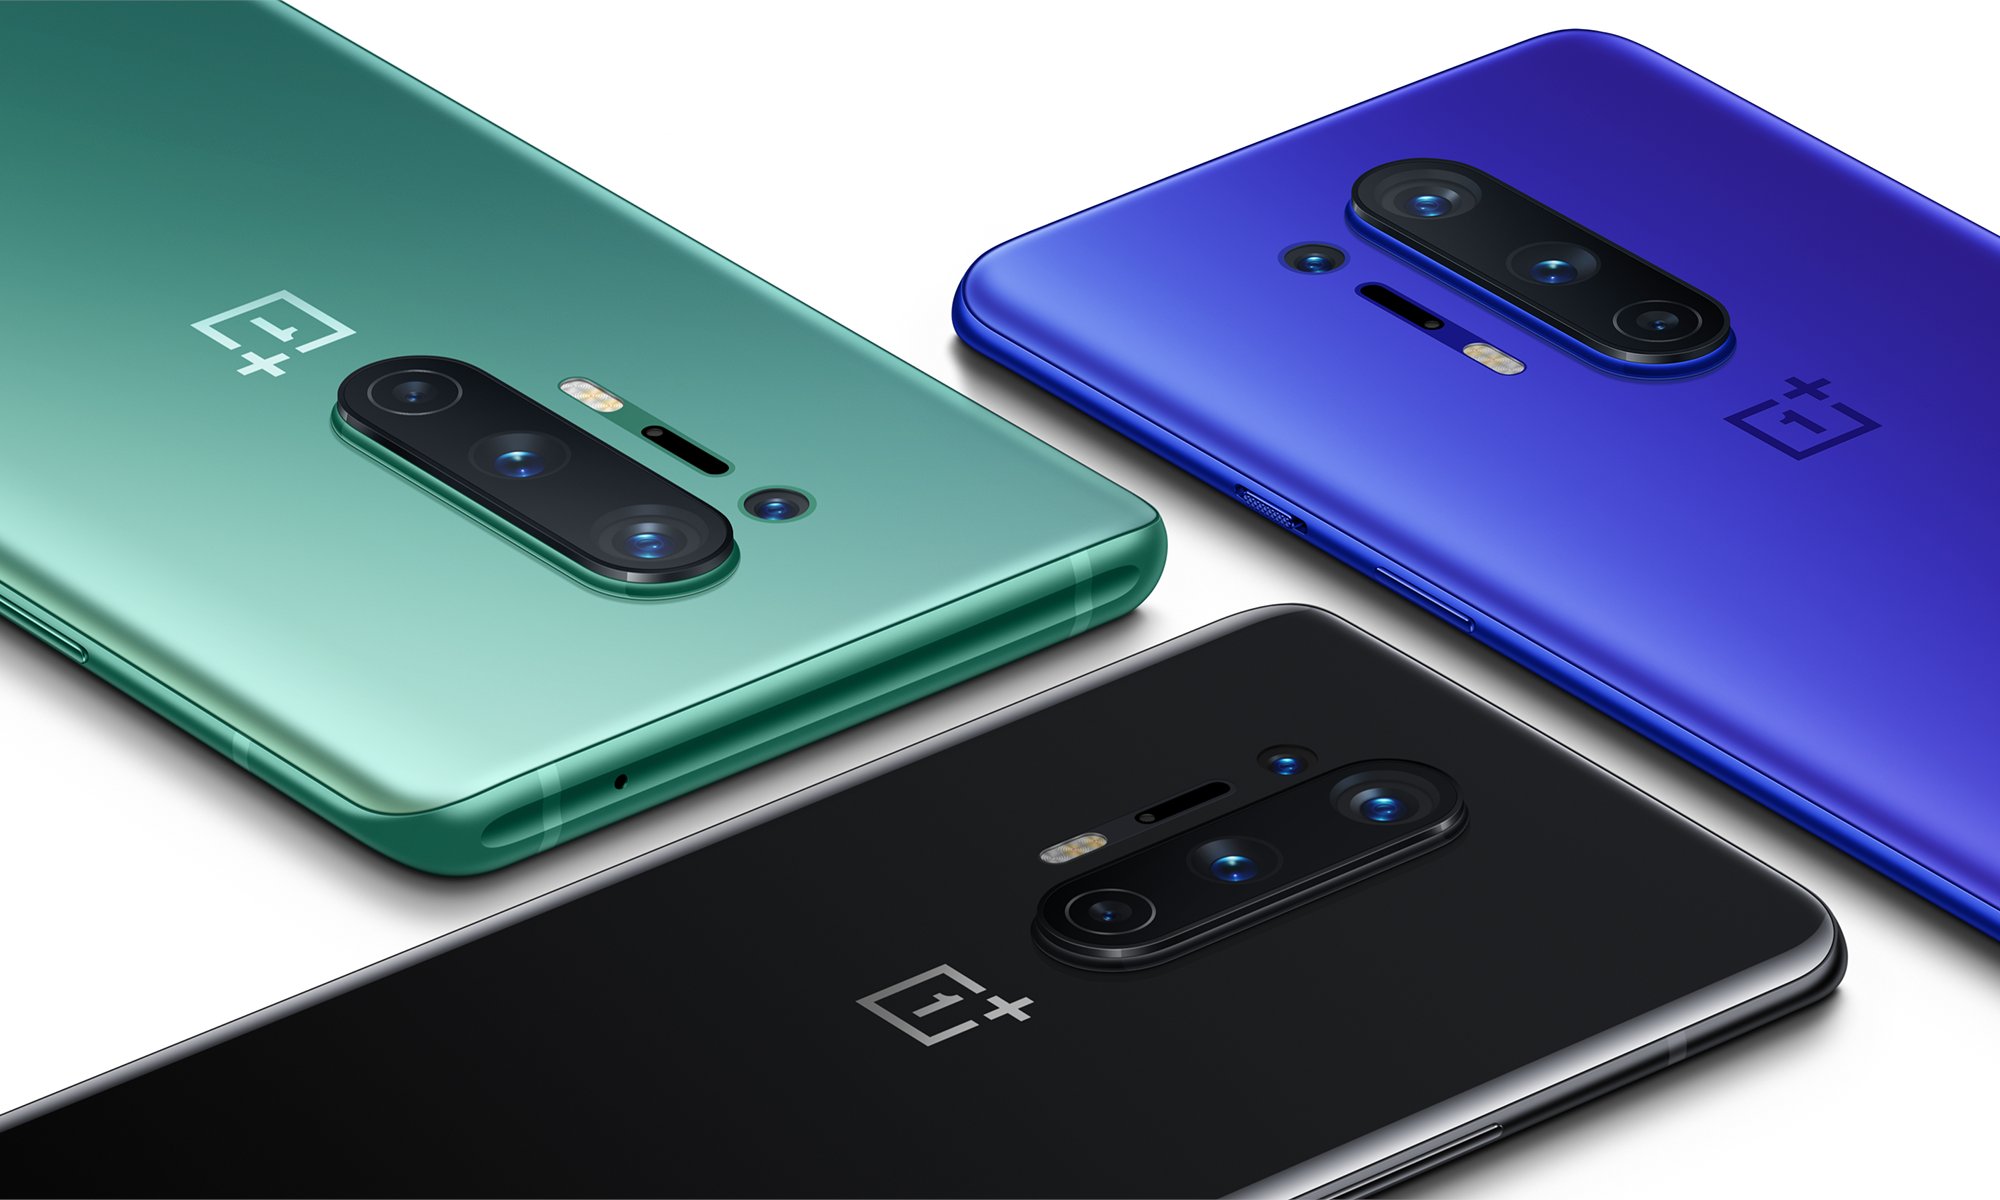 OnePlus has officially confirmed ColorOS release dates for 2019-2020 flagships